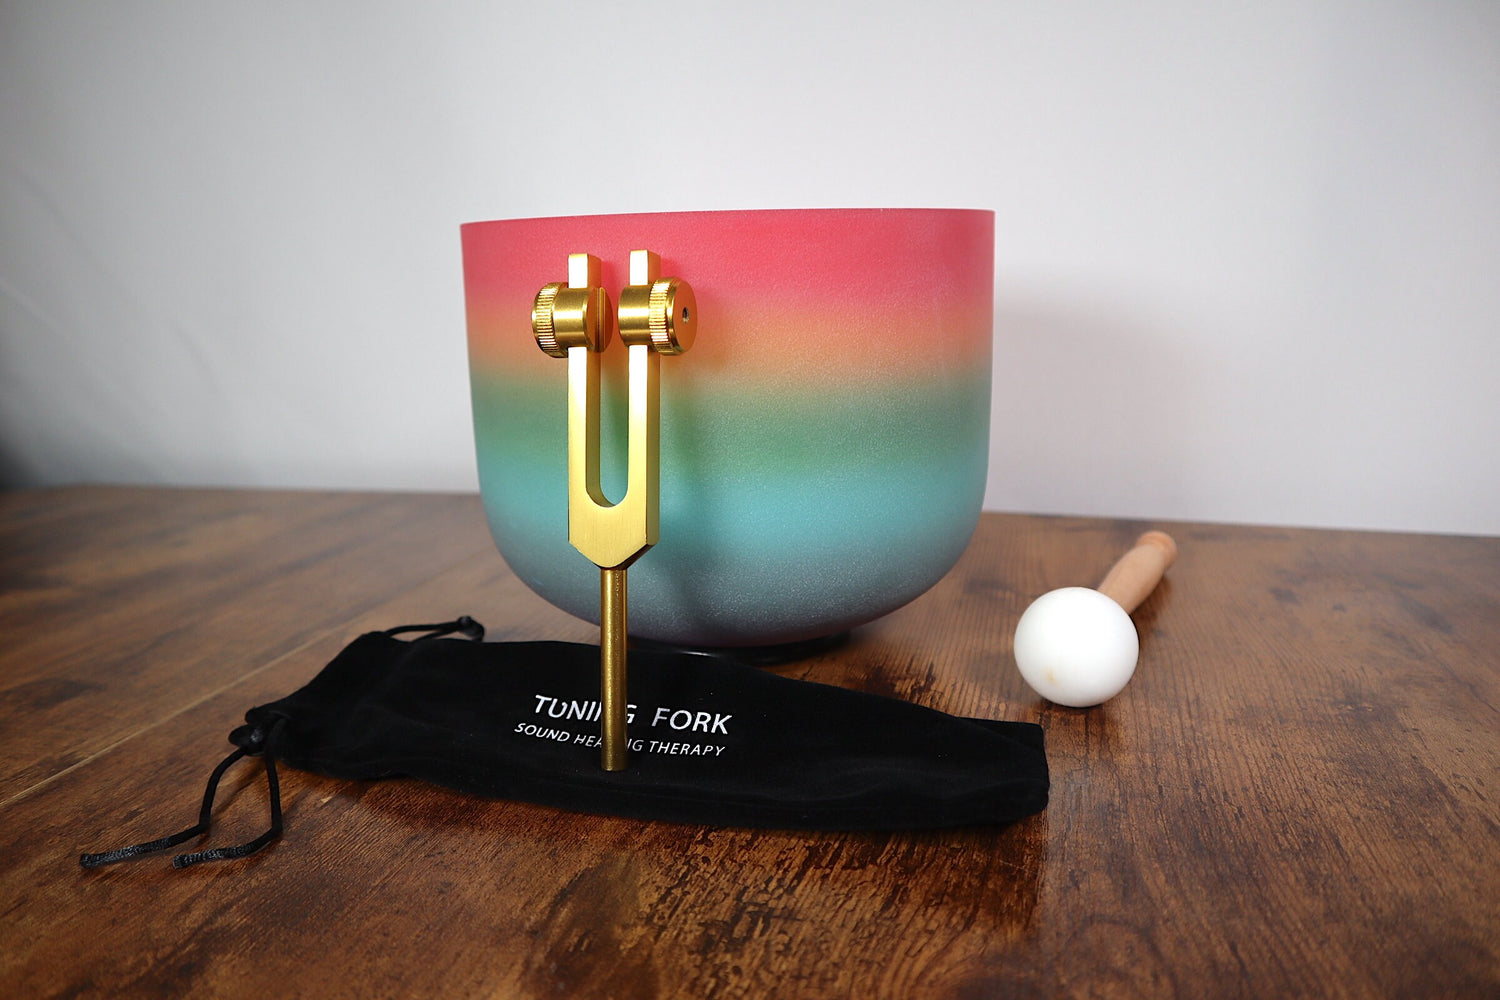 432hz Rainbow 8" Crystal Singing C Note Bowl, Flower of Life Carry Bag, O-Ring, Cushion, Mallet - Gift For Her